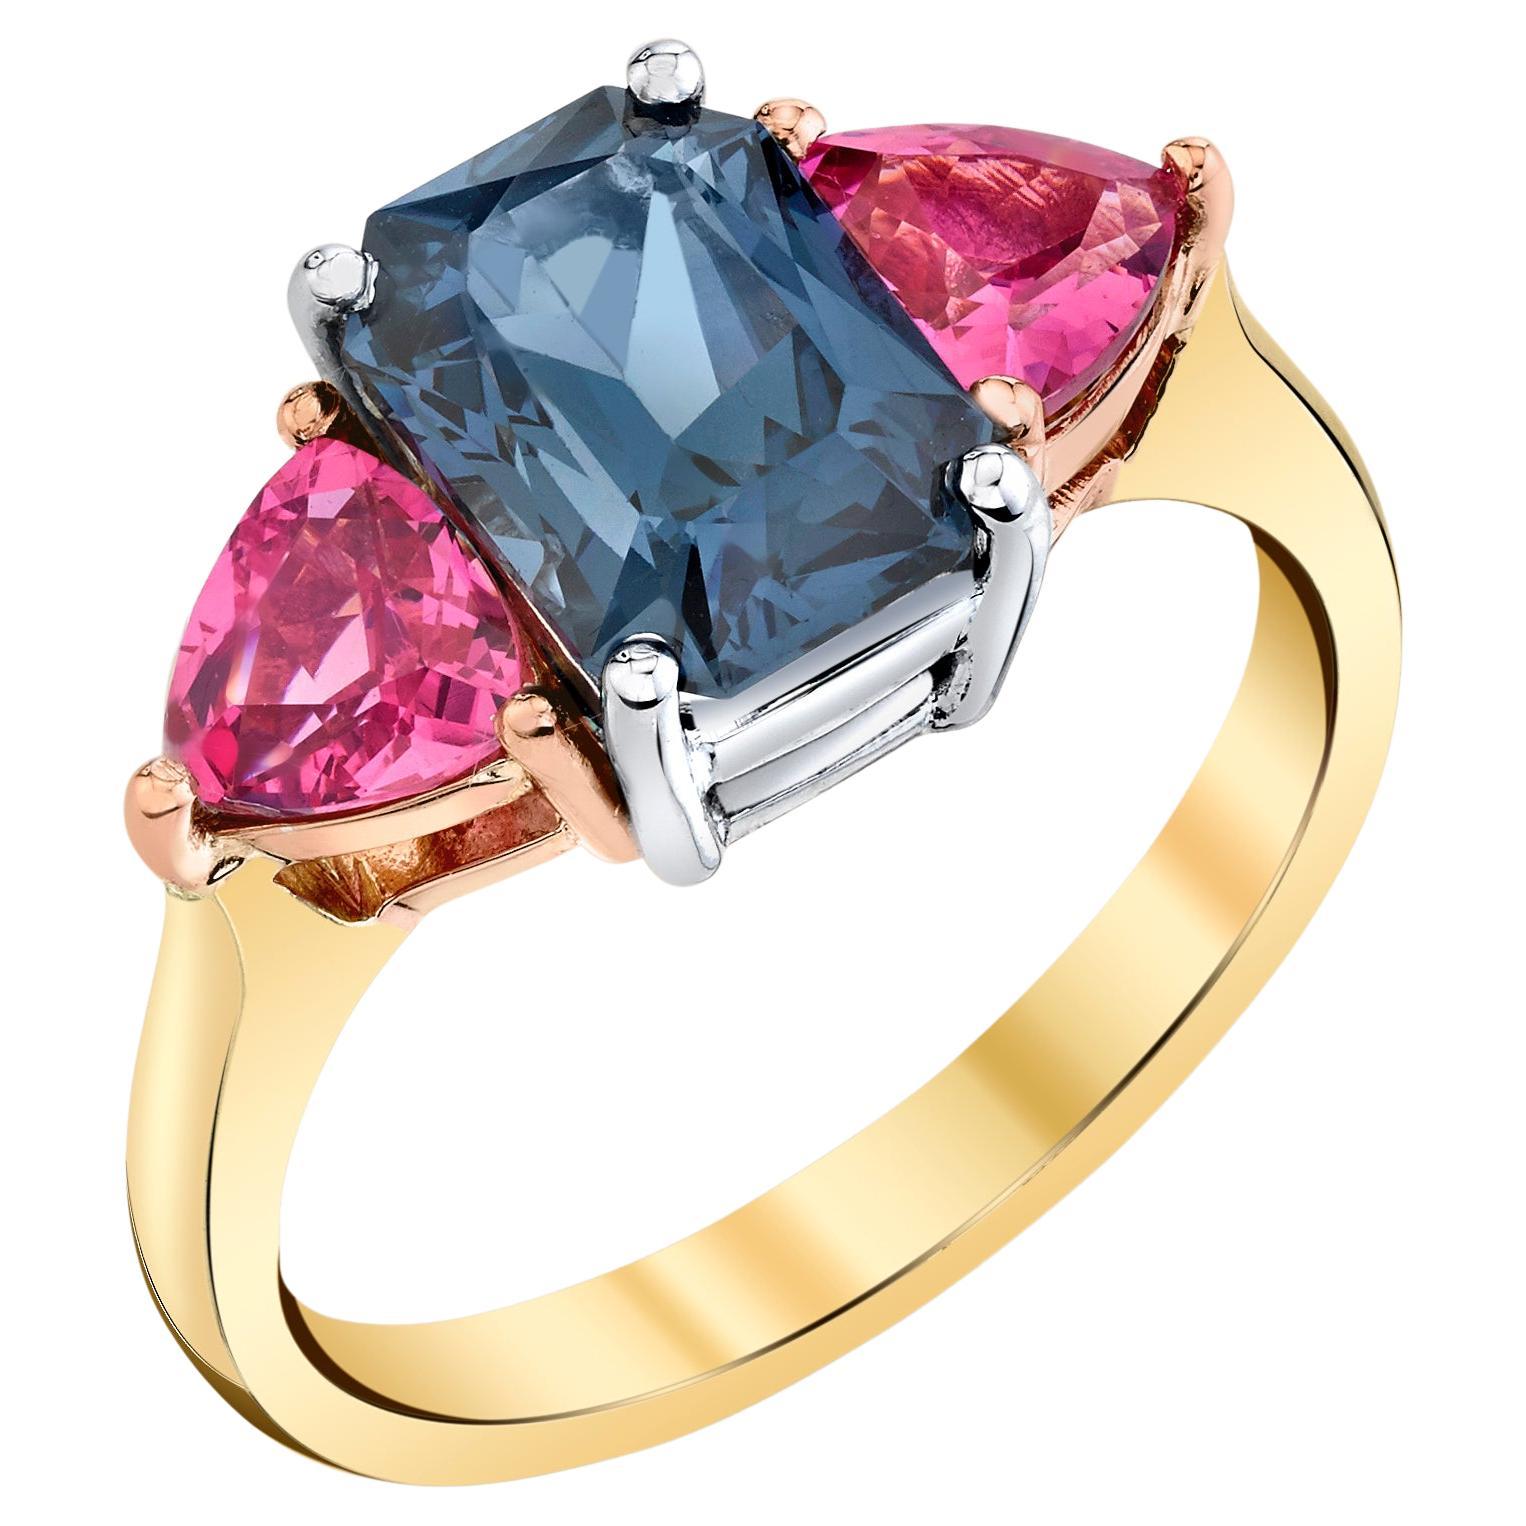 Lavender and Pink Mahenge Spinel Engagement Ring in White and Yellow Gold